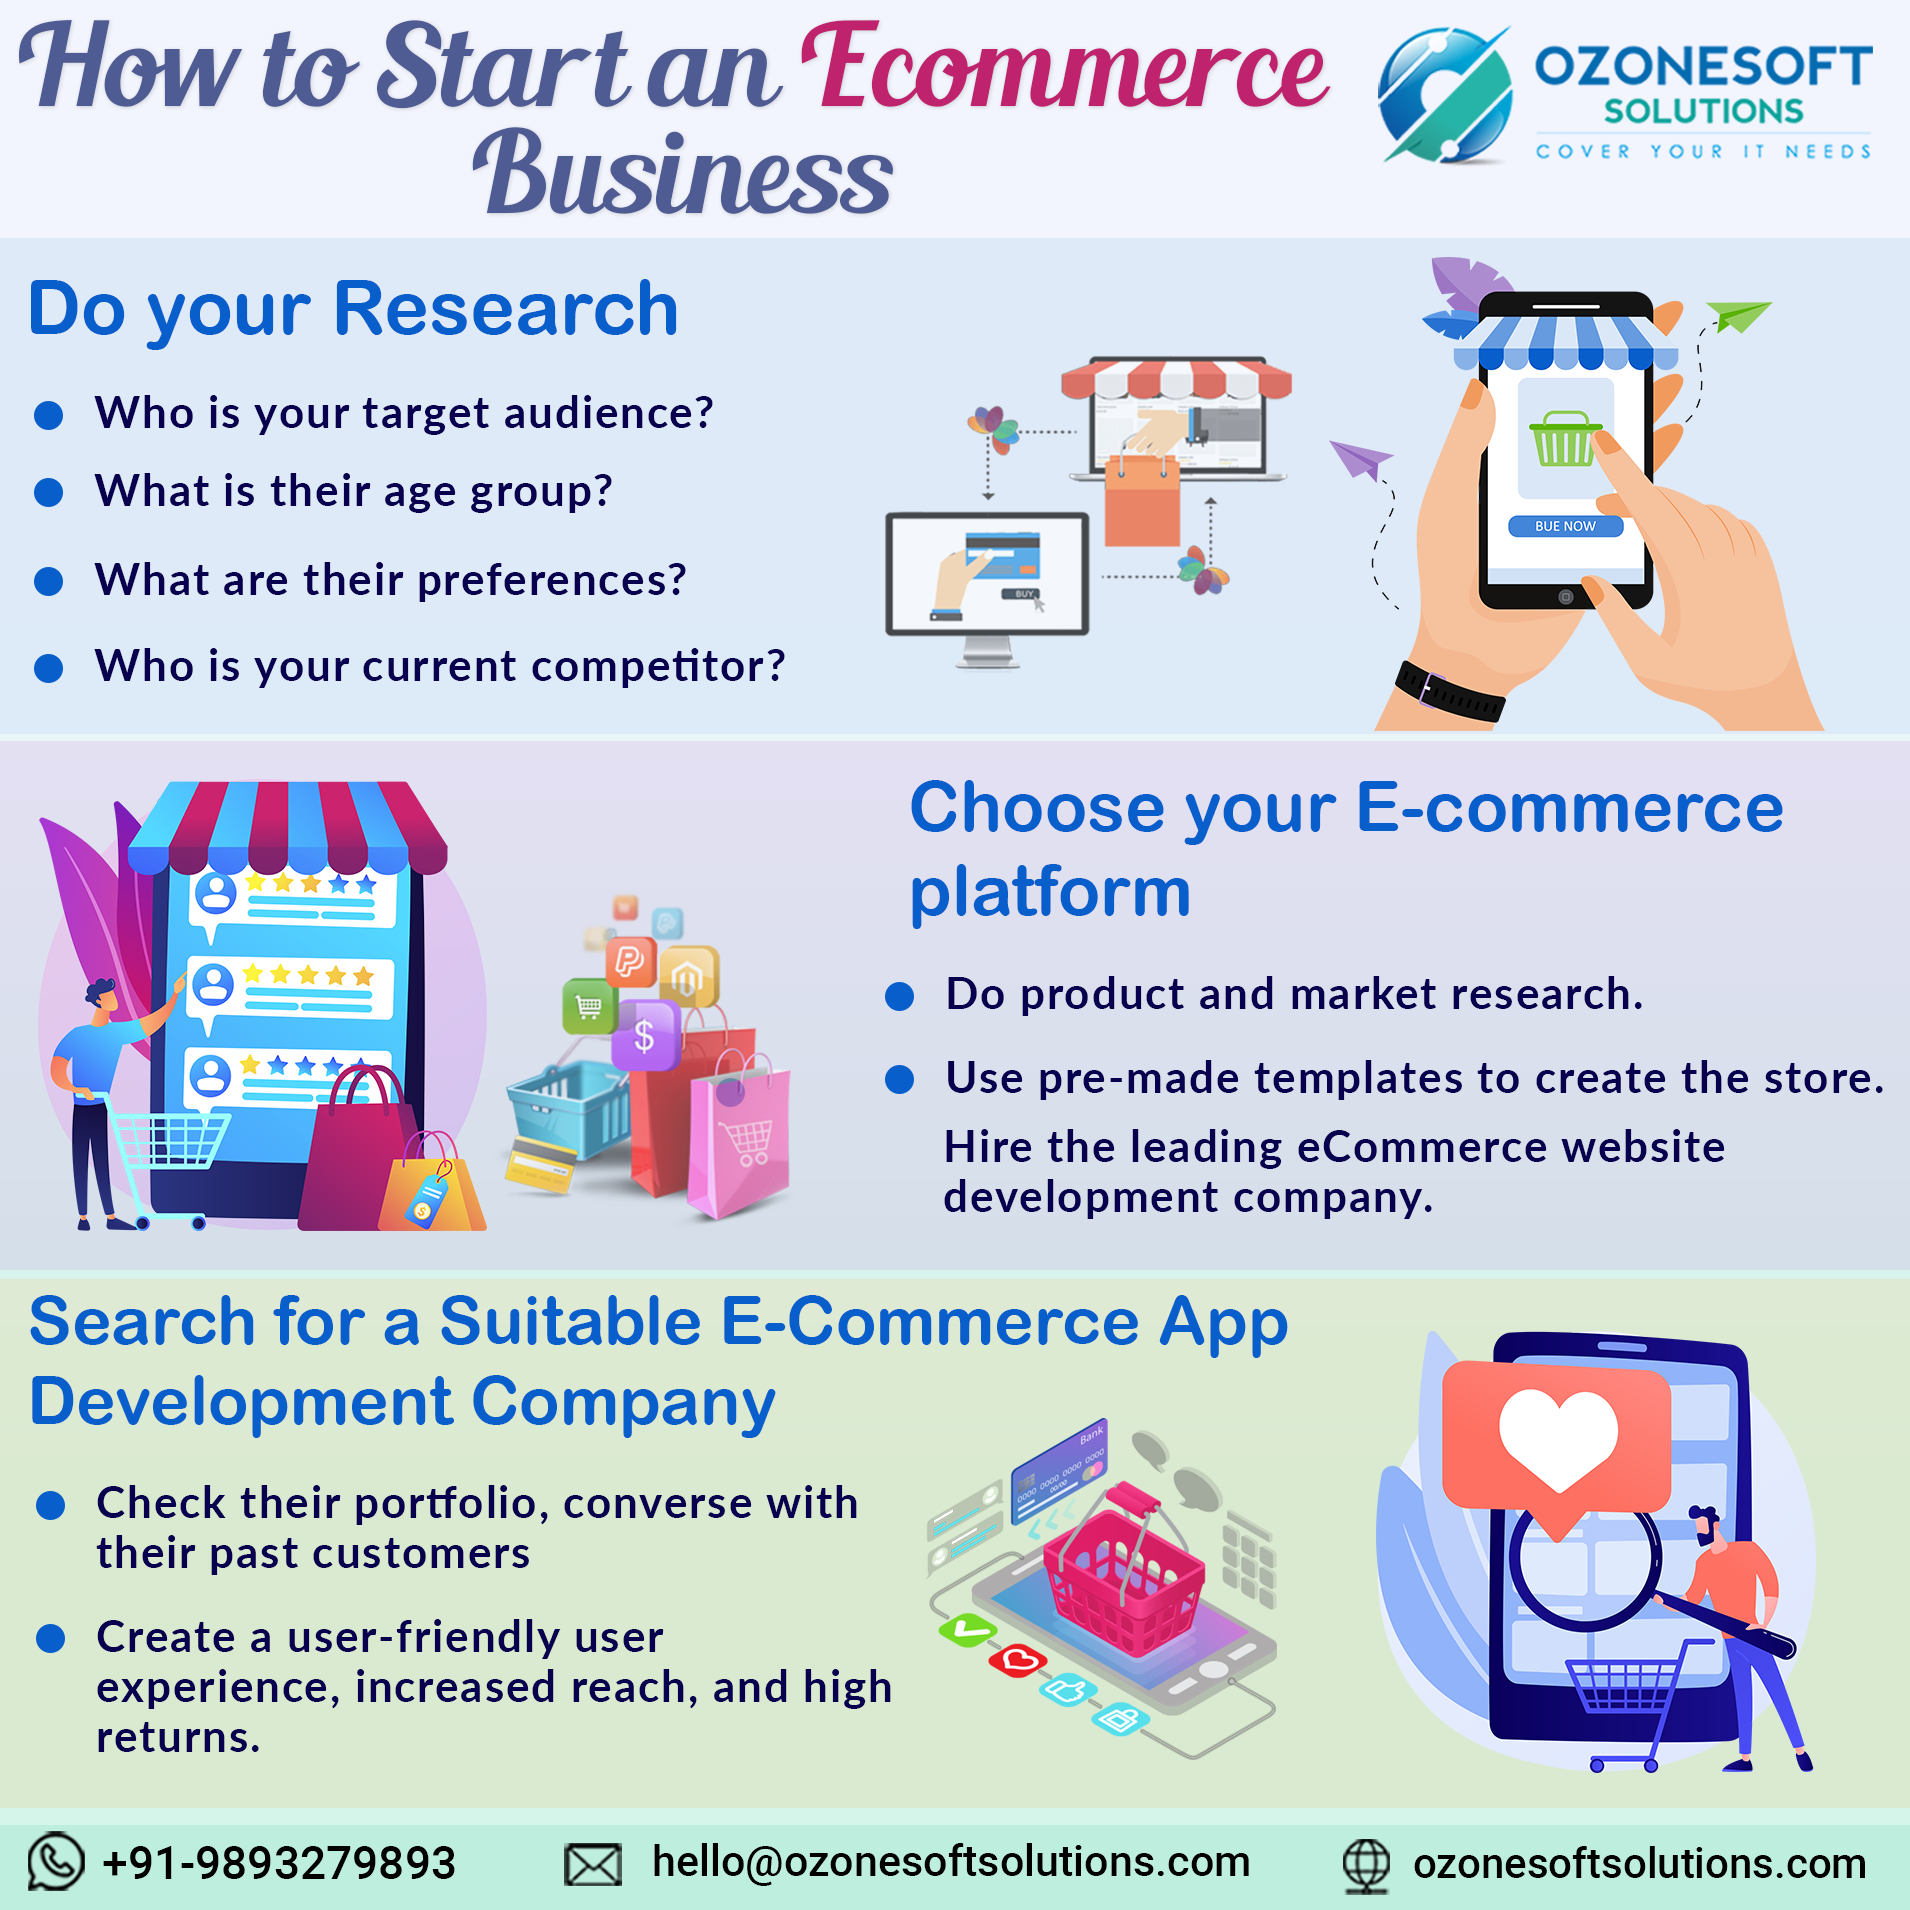 How to Start an Ecommerce Business with eCommerce Web Design Services?